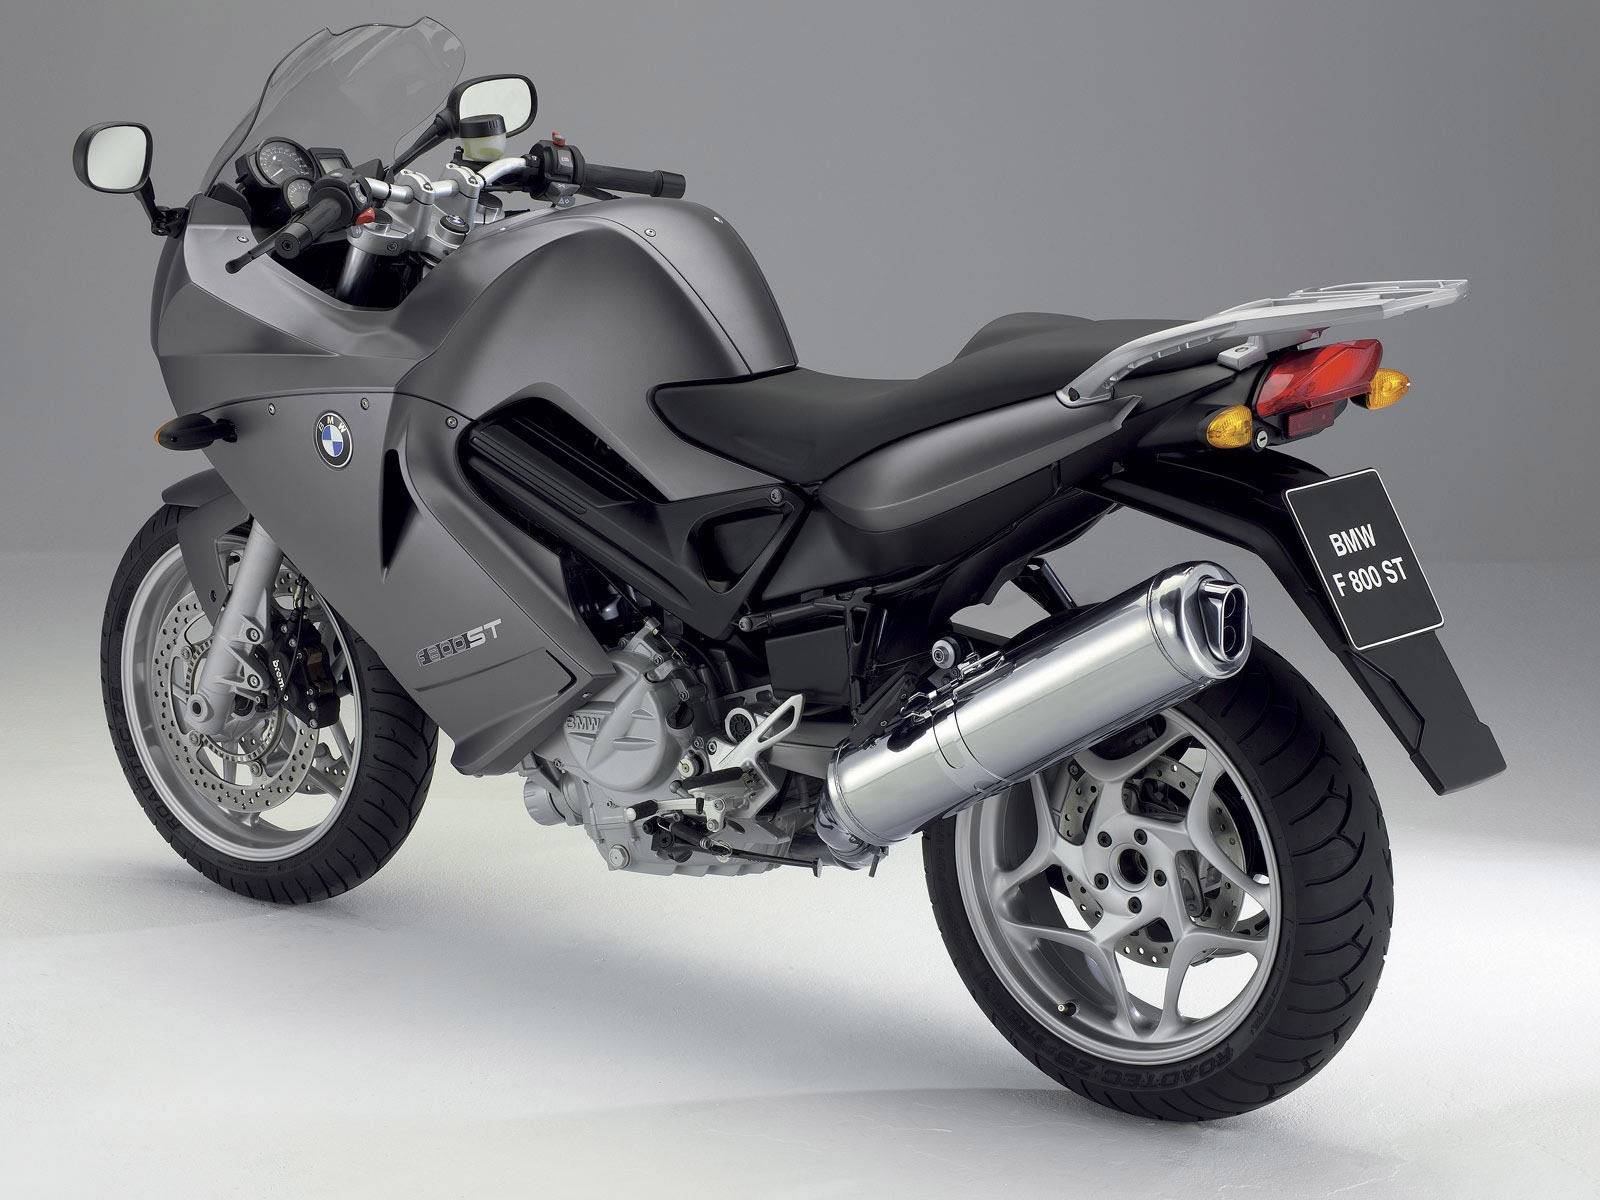 BMW motorcycle wallpapers (3) #2 - 1600x1200